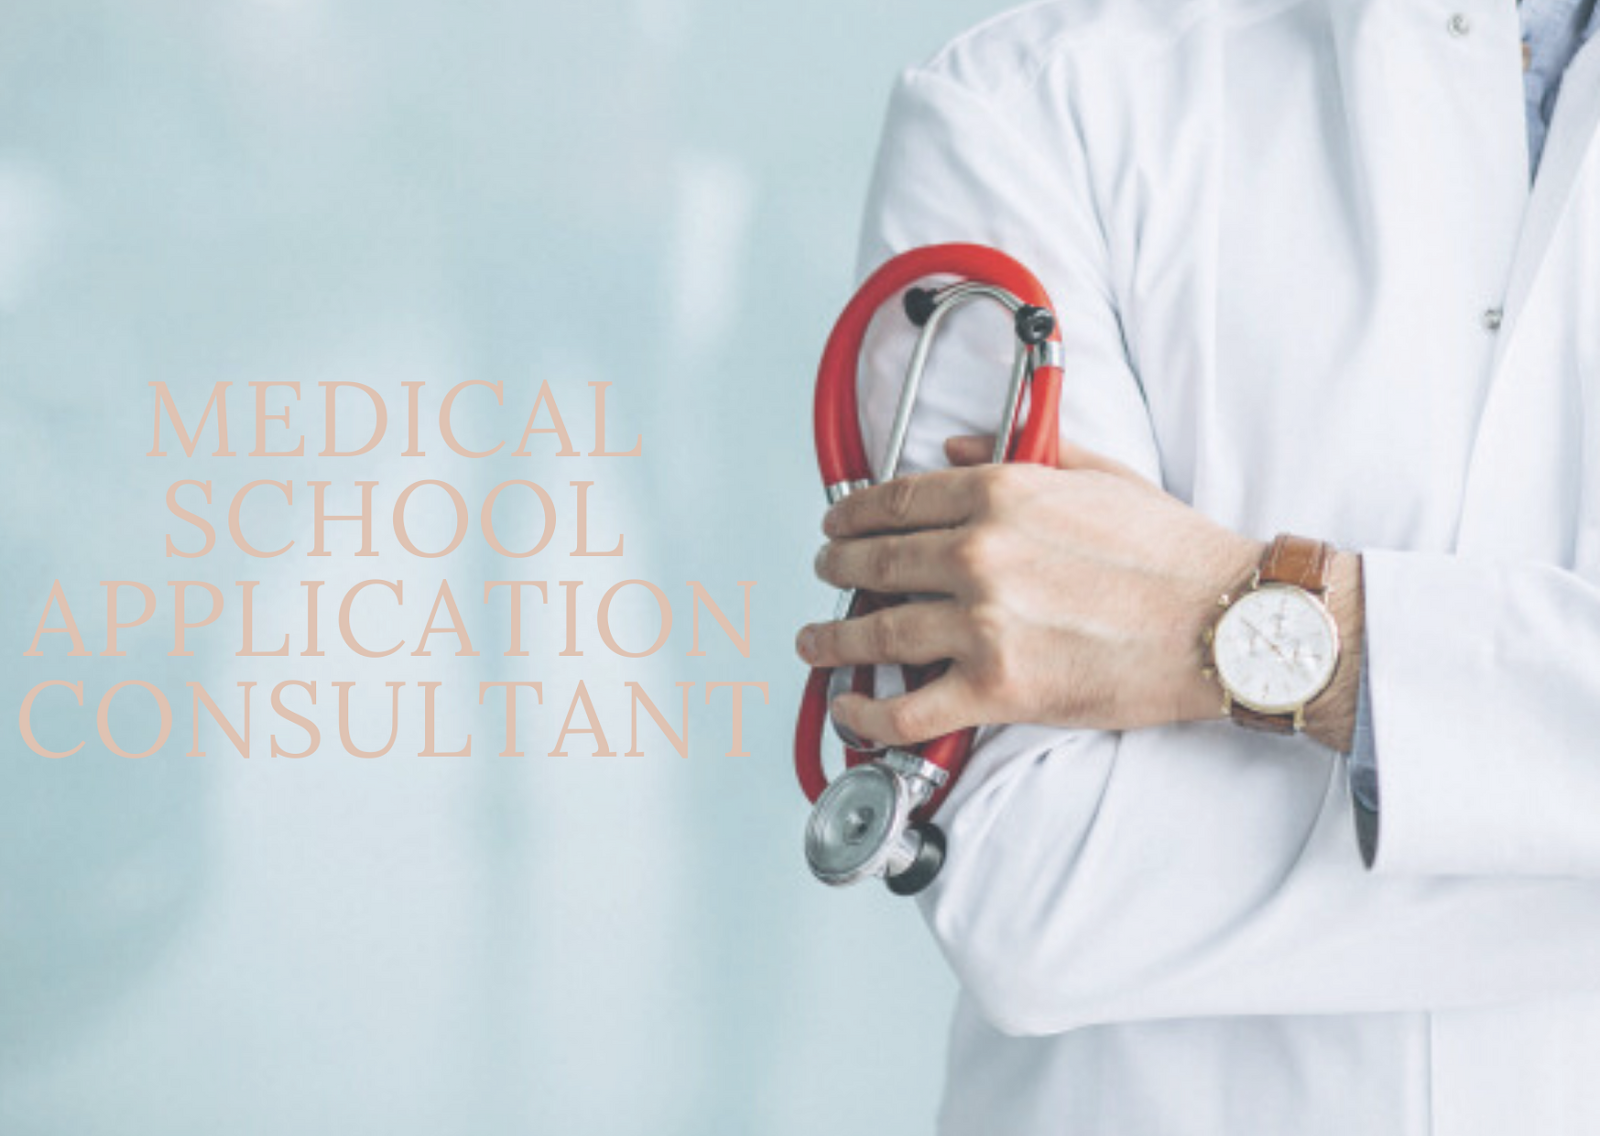 Selecting a Medical School Application Consultant